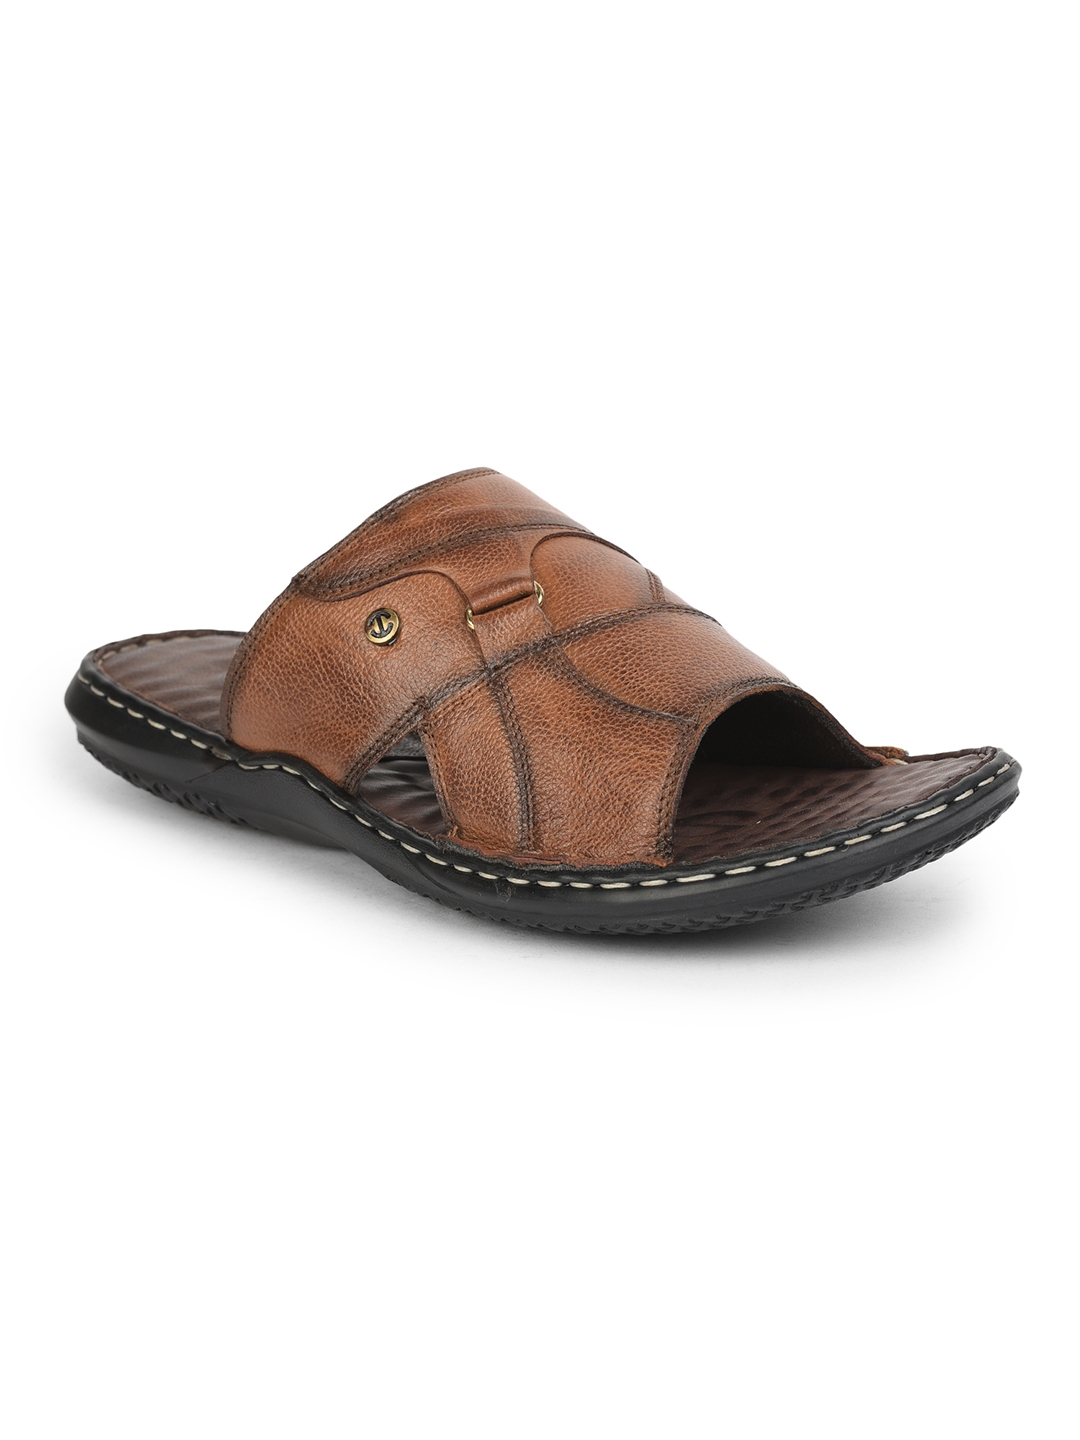 Liberty | Healers by Liberty Brown Slippers DTL-112 For :- Men